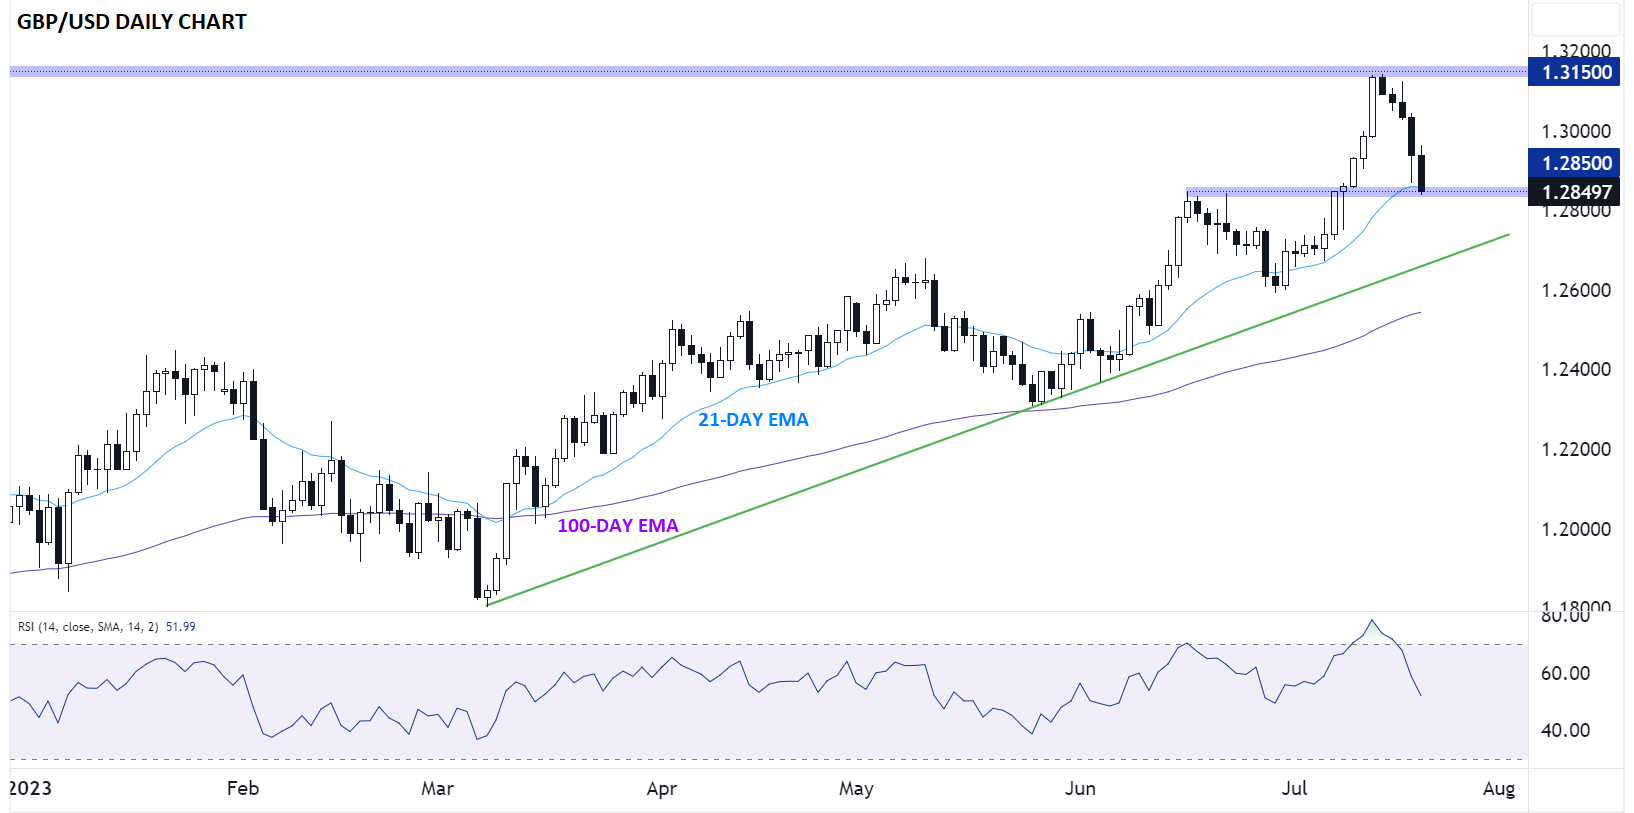 USD/CAD Price Analysis: Bears home in on daily trendline support